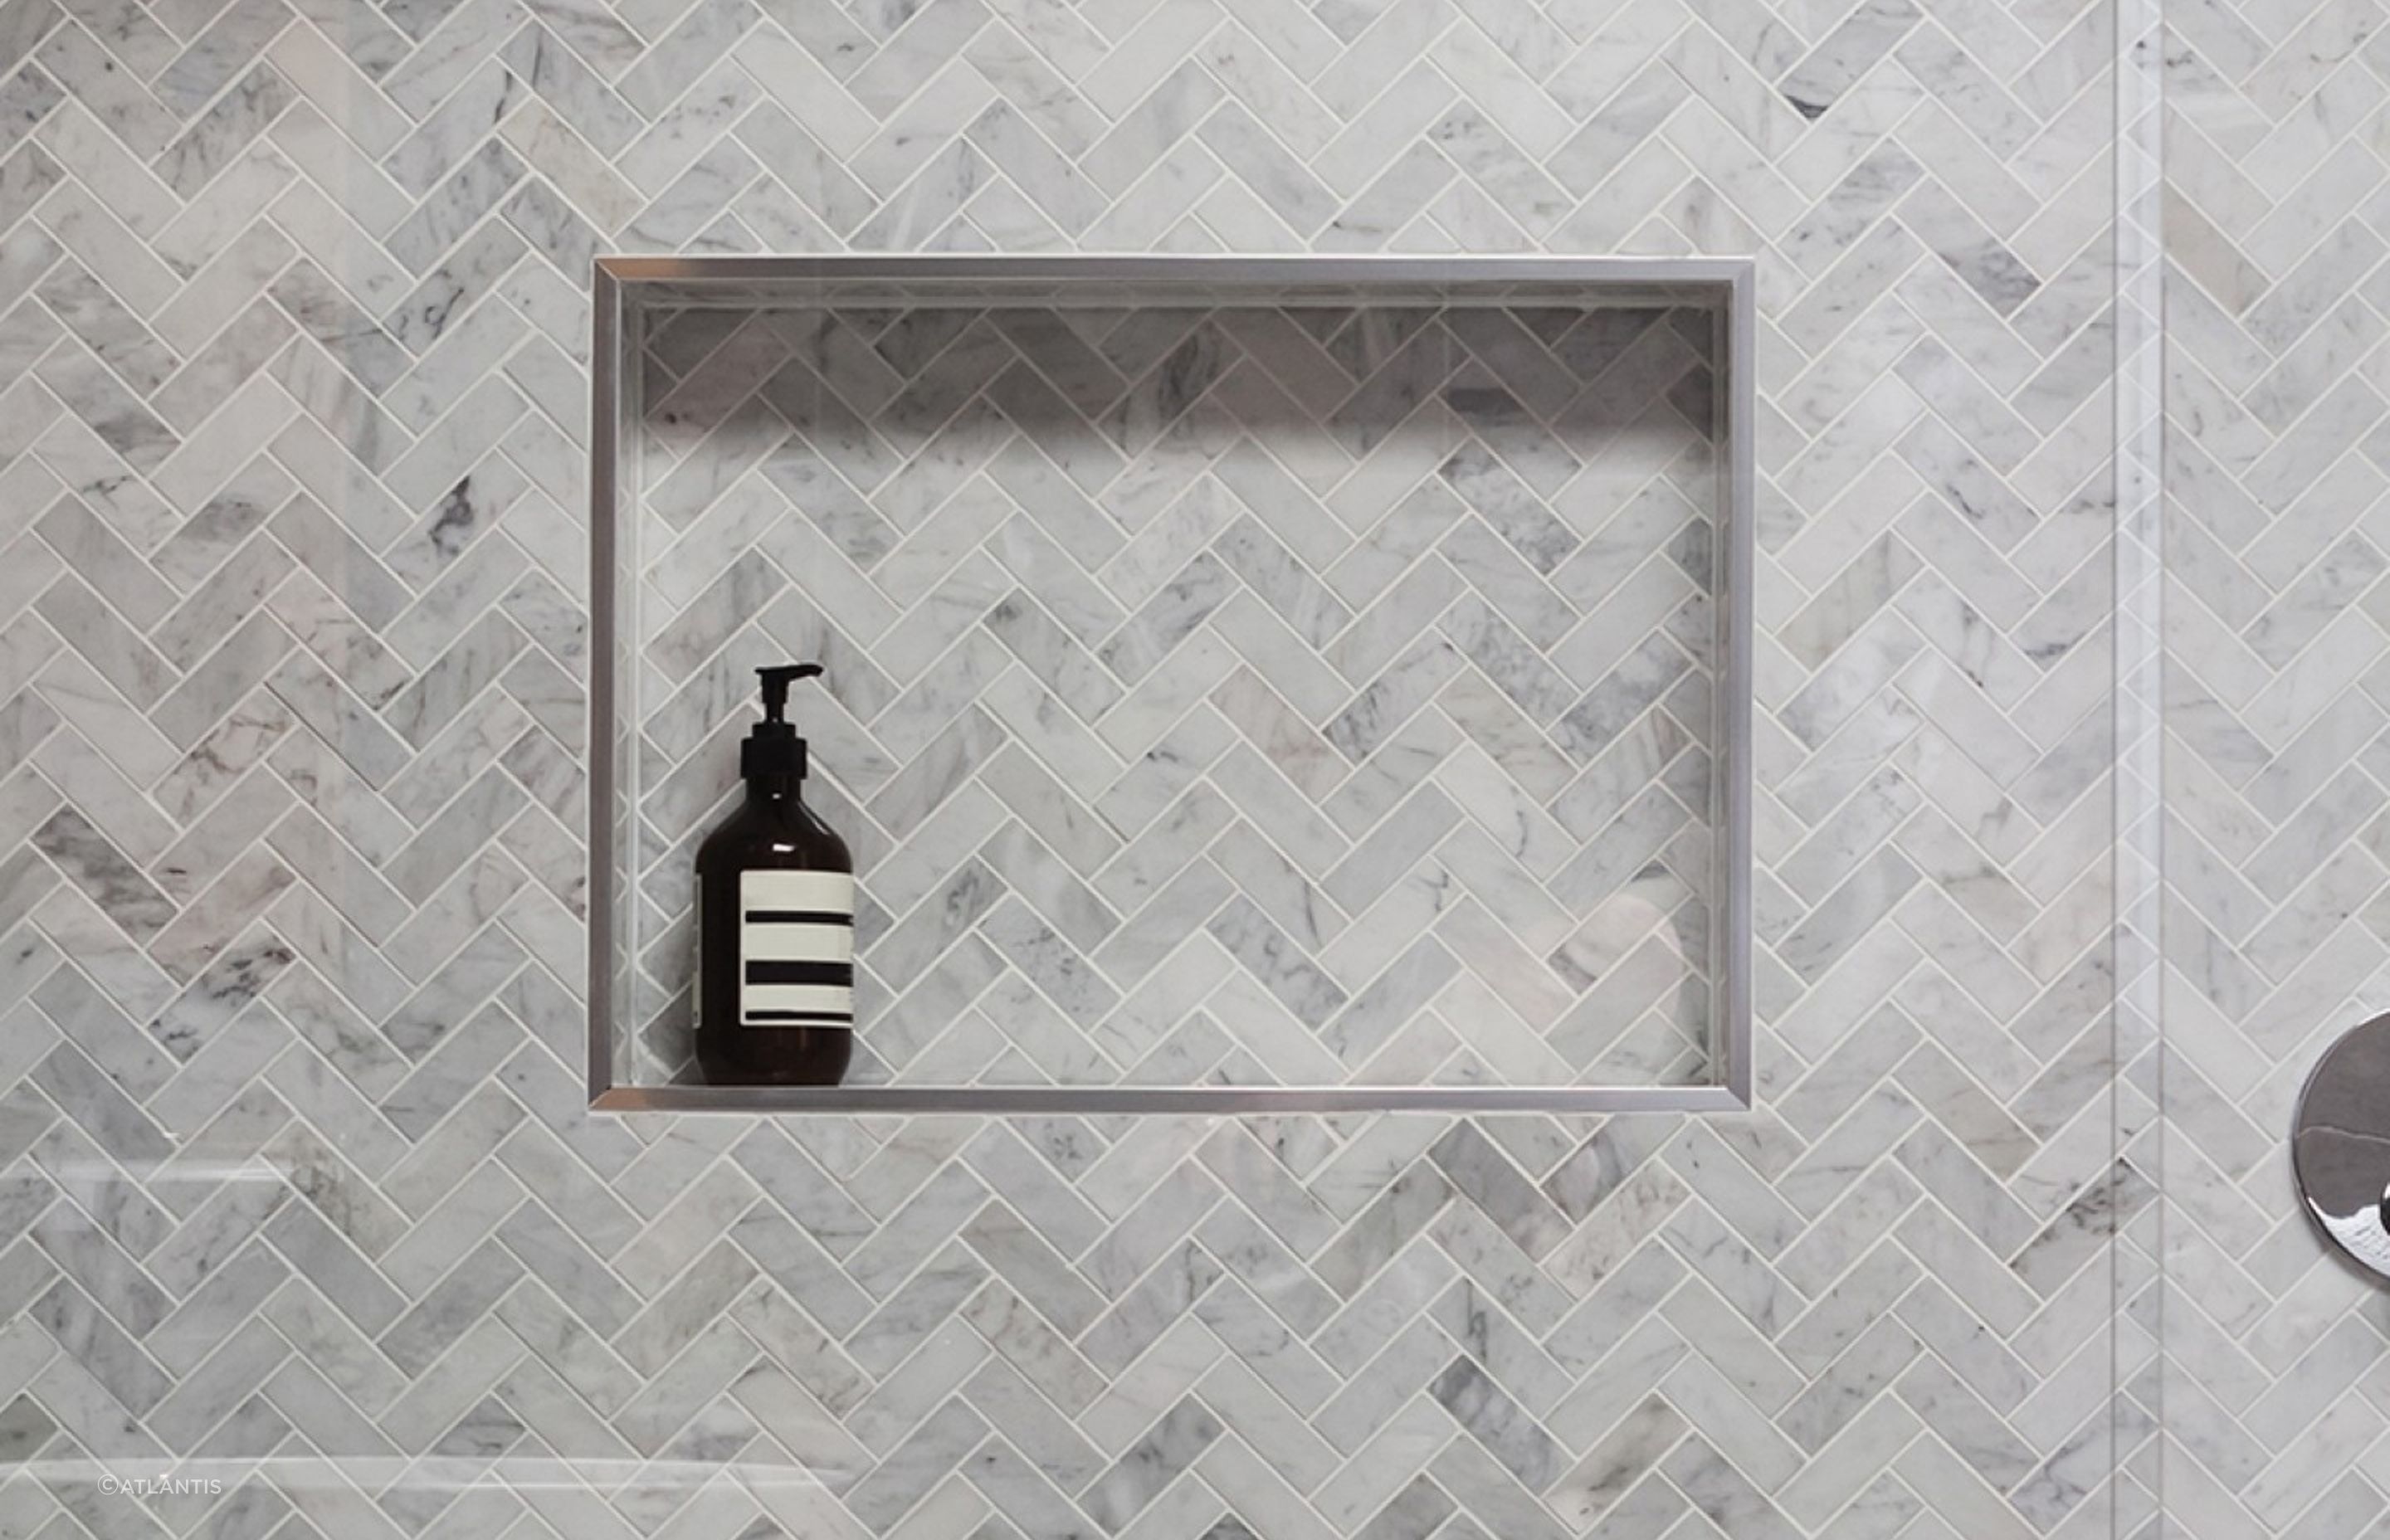 The Tile Over EasyNiche offers a sleek shower storage solution, perfect for the modern bathroom.